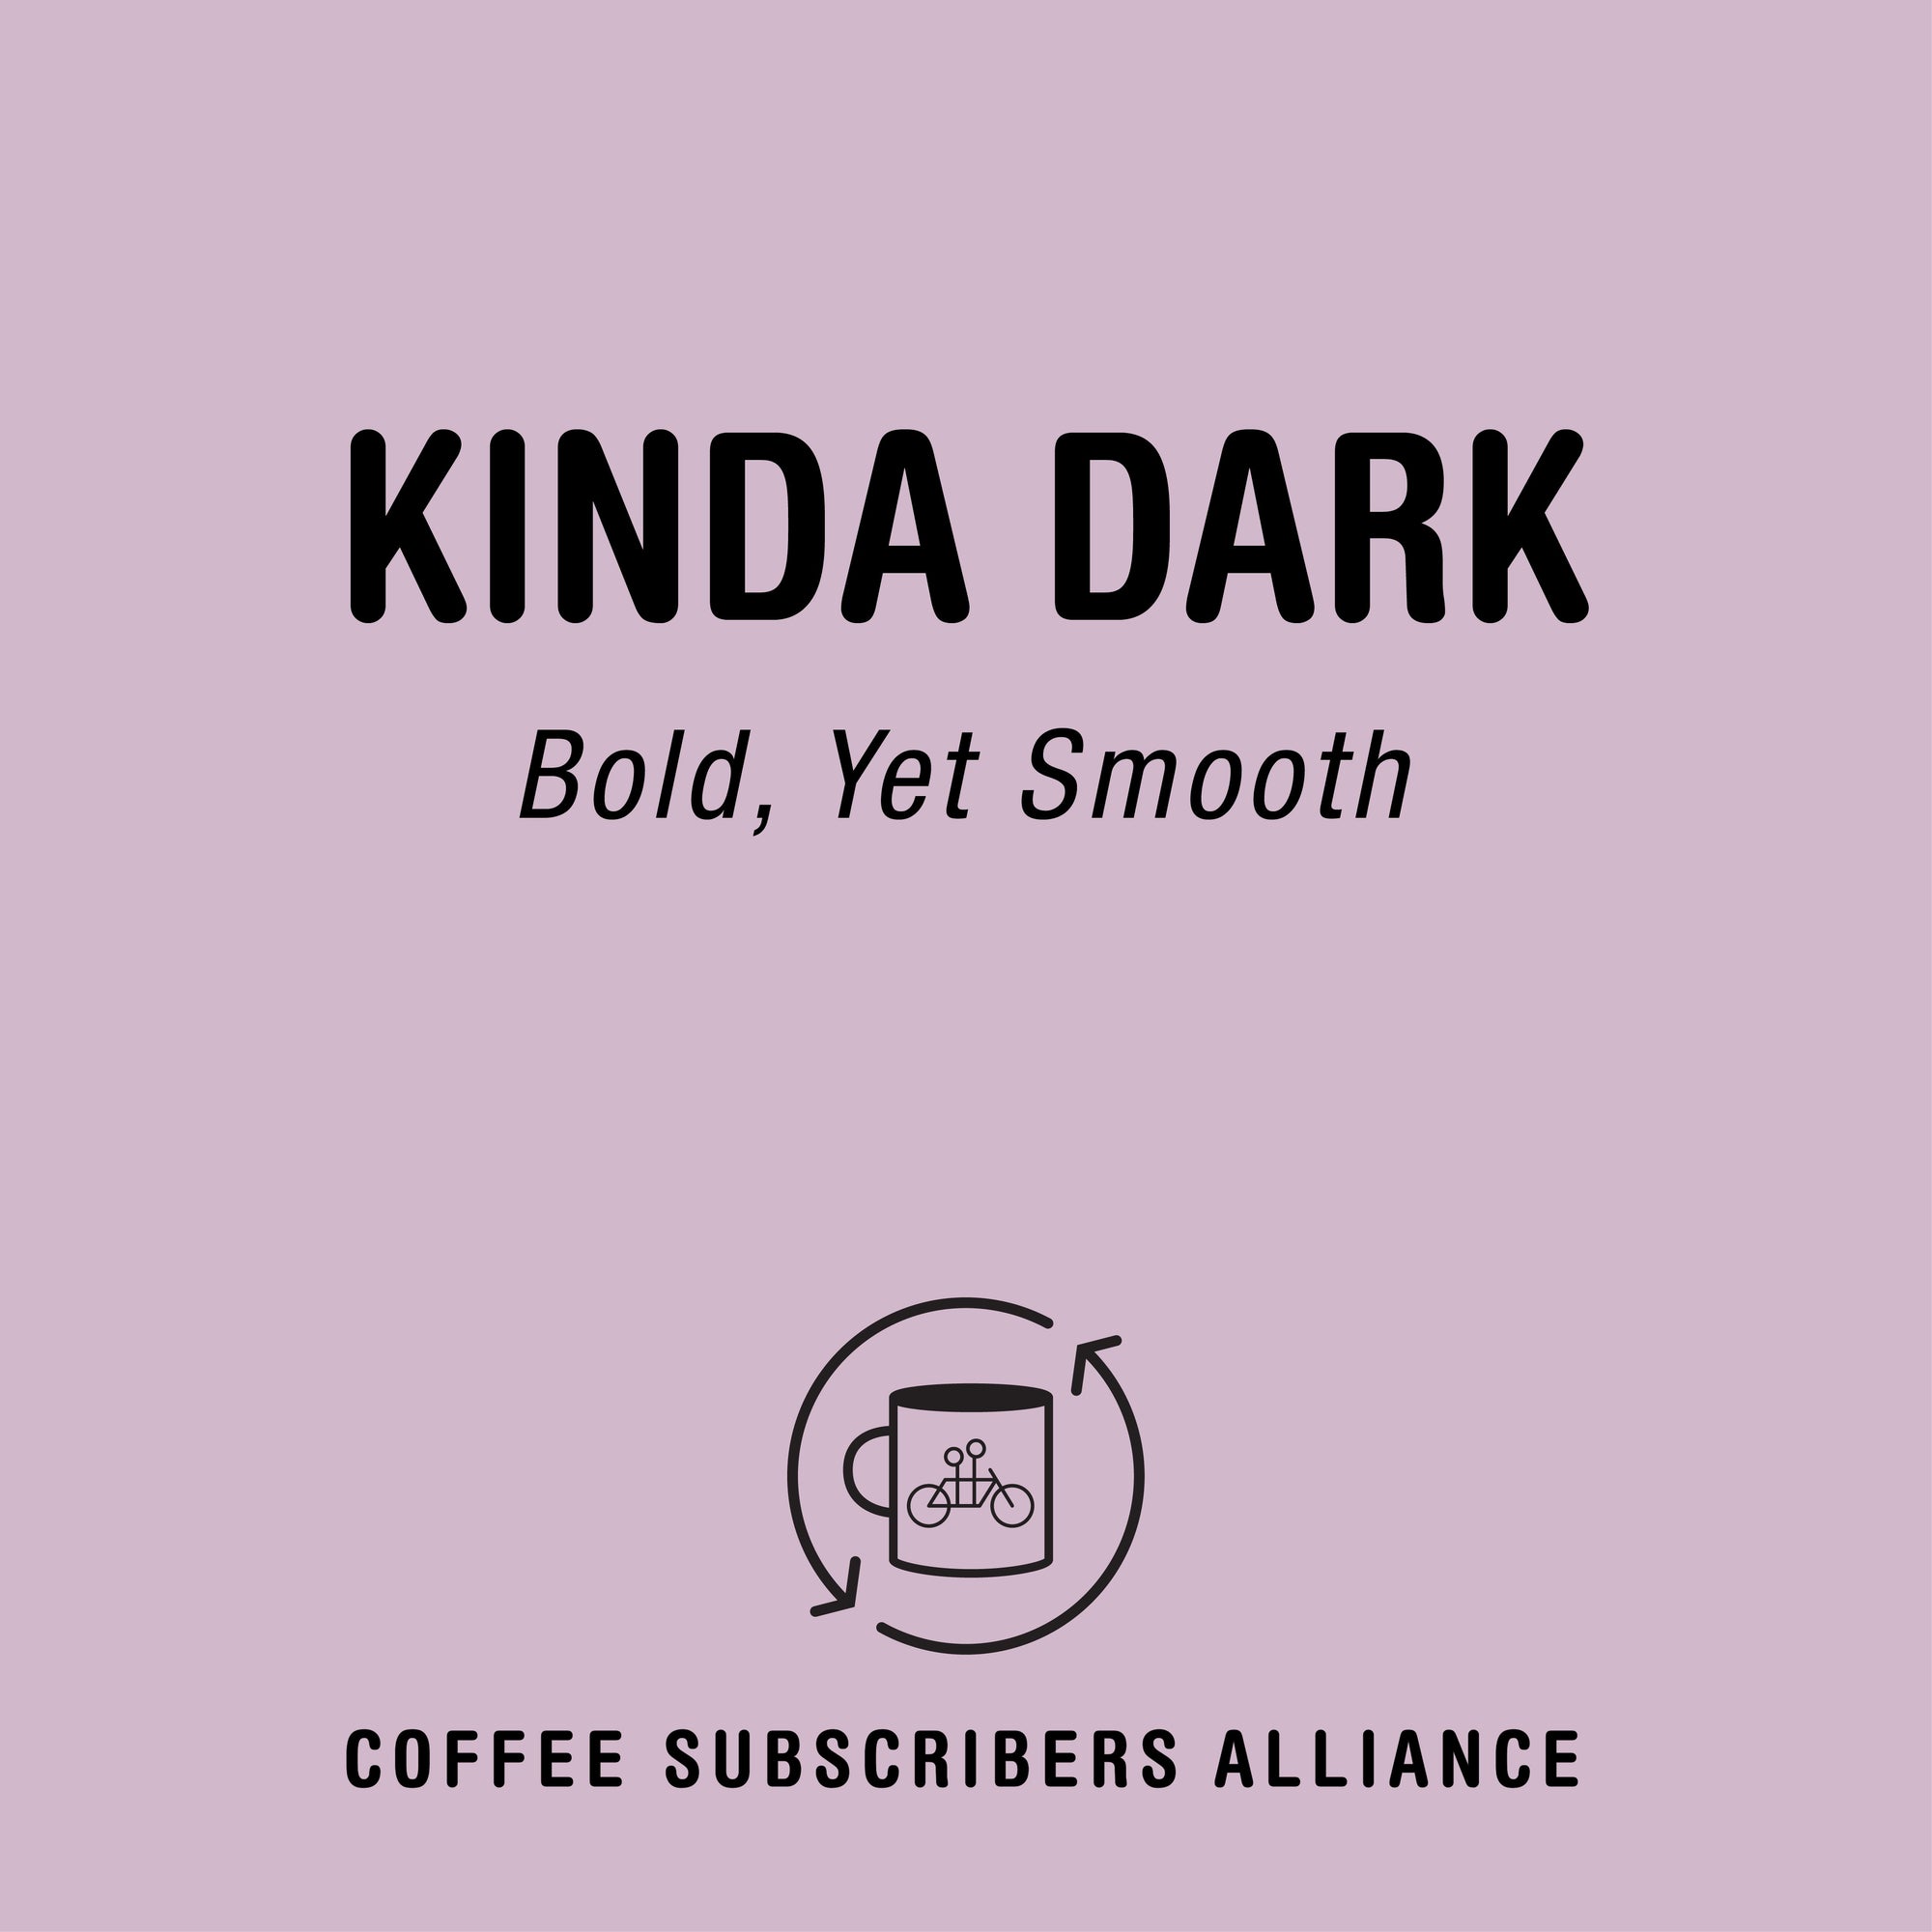 A promotional graphic for the "Kinda Dark Subscription Gift - 1 Week x 12" from Tandem with the tagline "bold, yet smooth." It features a simple logo of a coffee cup and includes text for "subscription coffee alliance" on a.